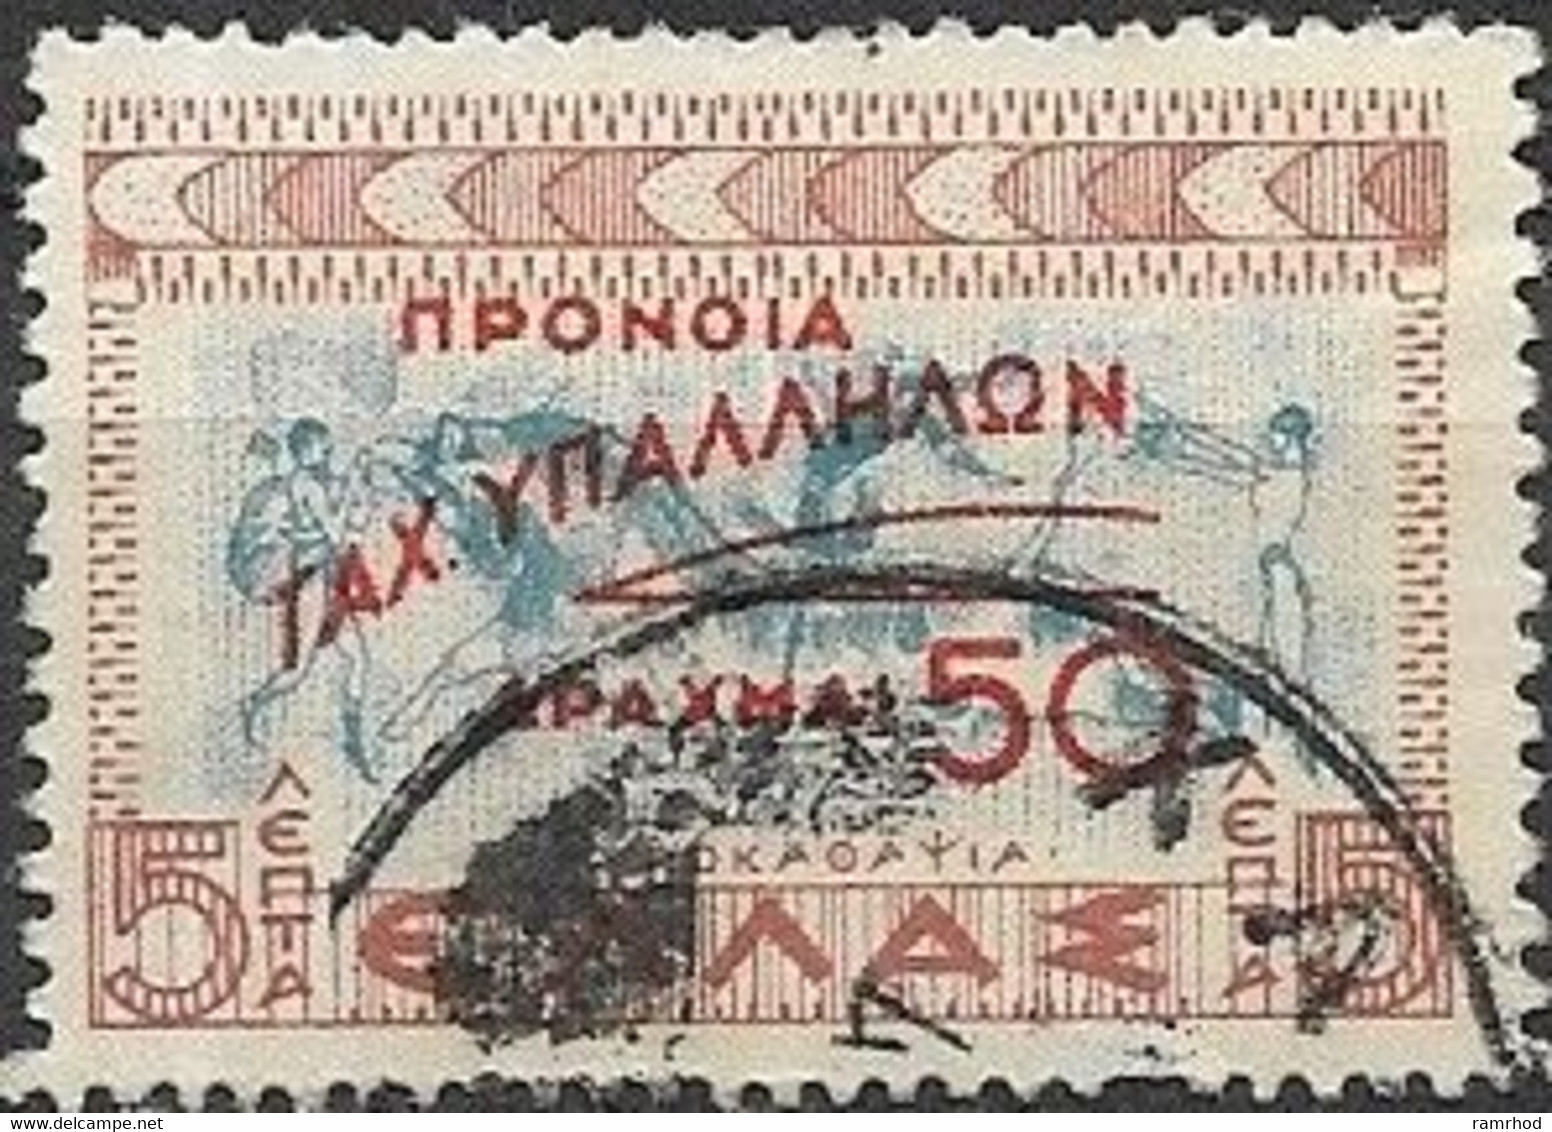 GREECE 1951 Postal Staff Welfare Fund - Bull Leaping Surcharged - 50d. On 5l - Blue & Brown FU - Charity Issues